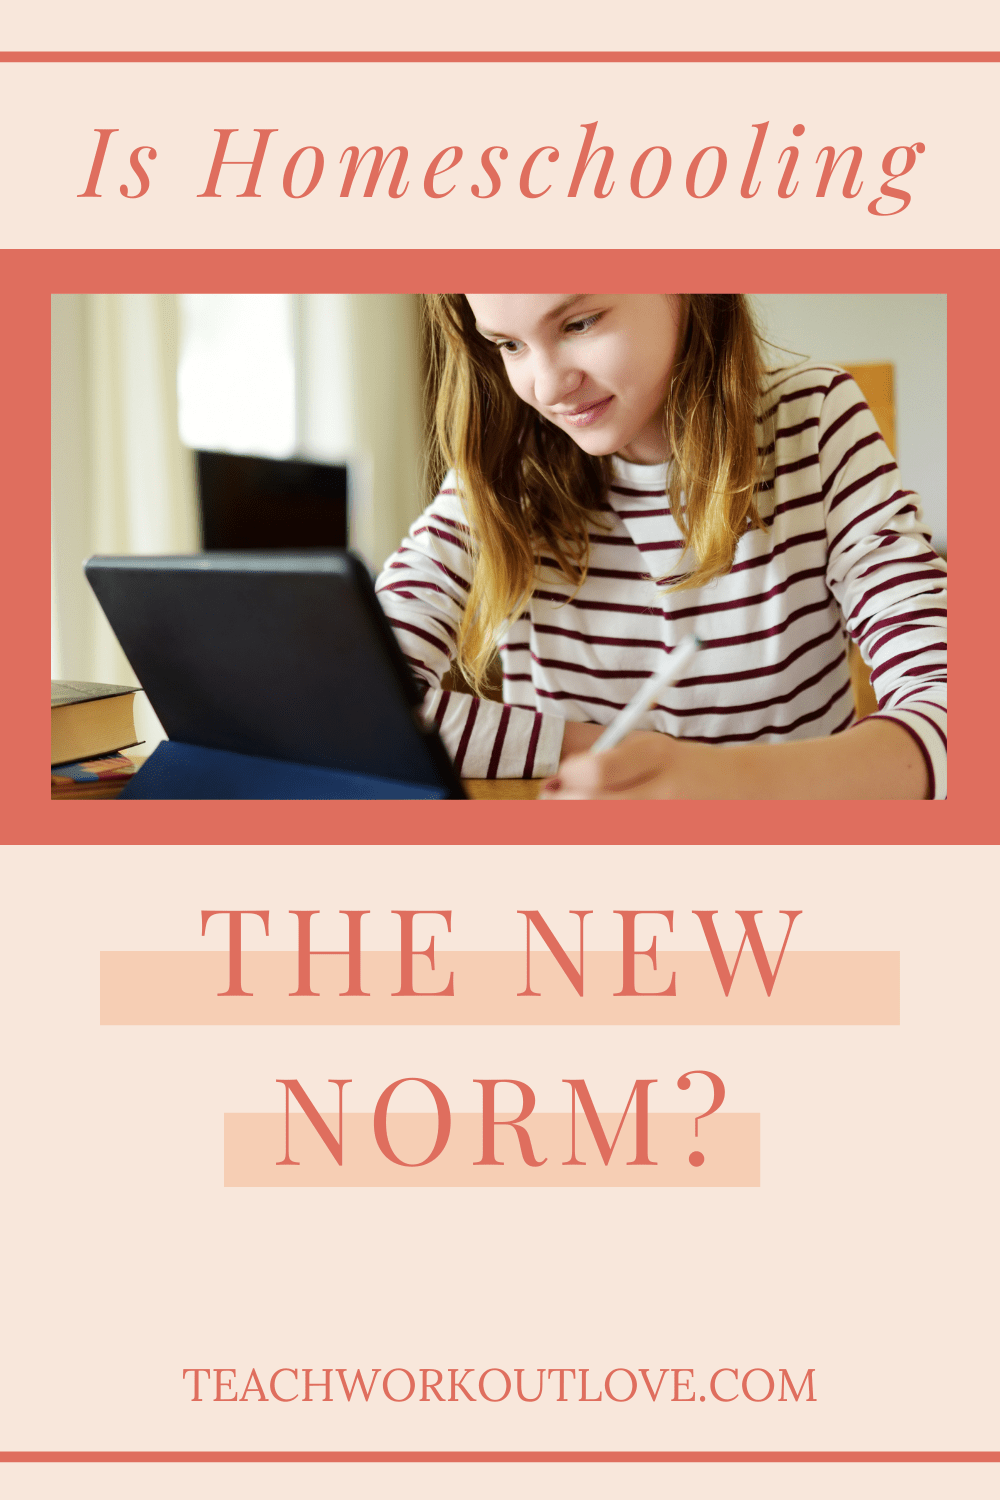 Is homeschooling the new "norm" for schoolage kids? Will we ever go back to brick and mortar school? Read on to see our thoughts.